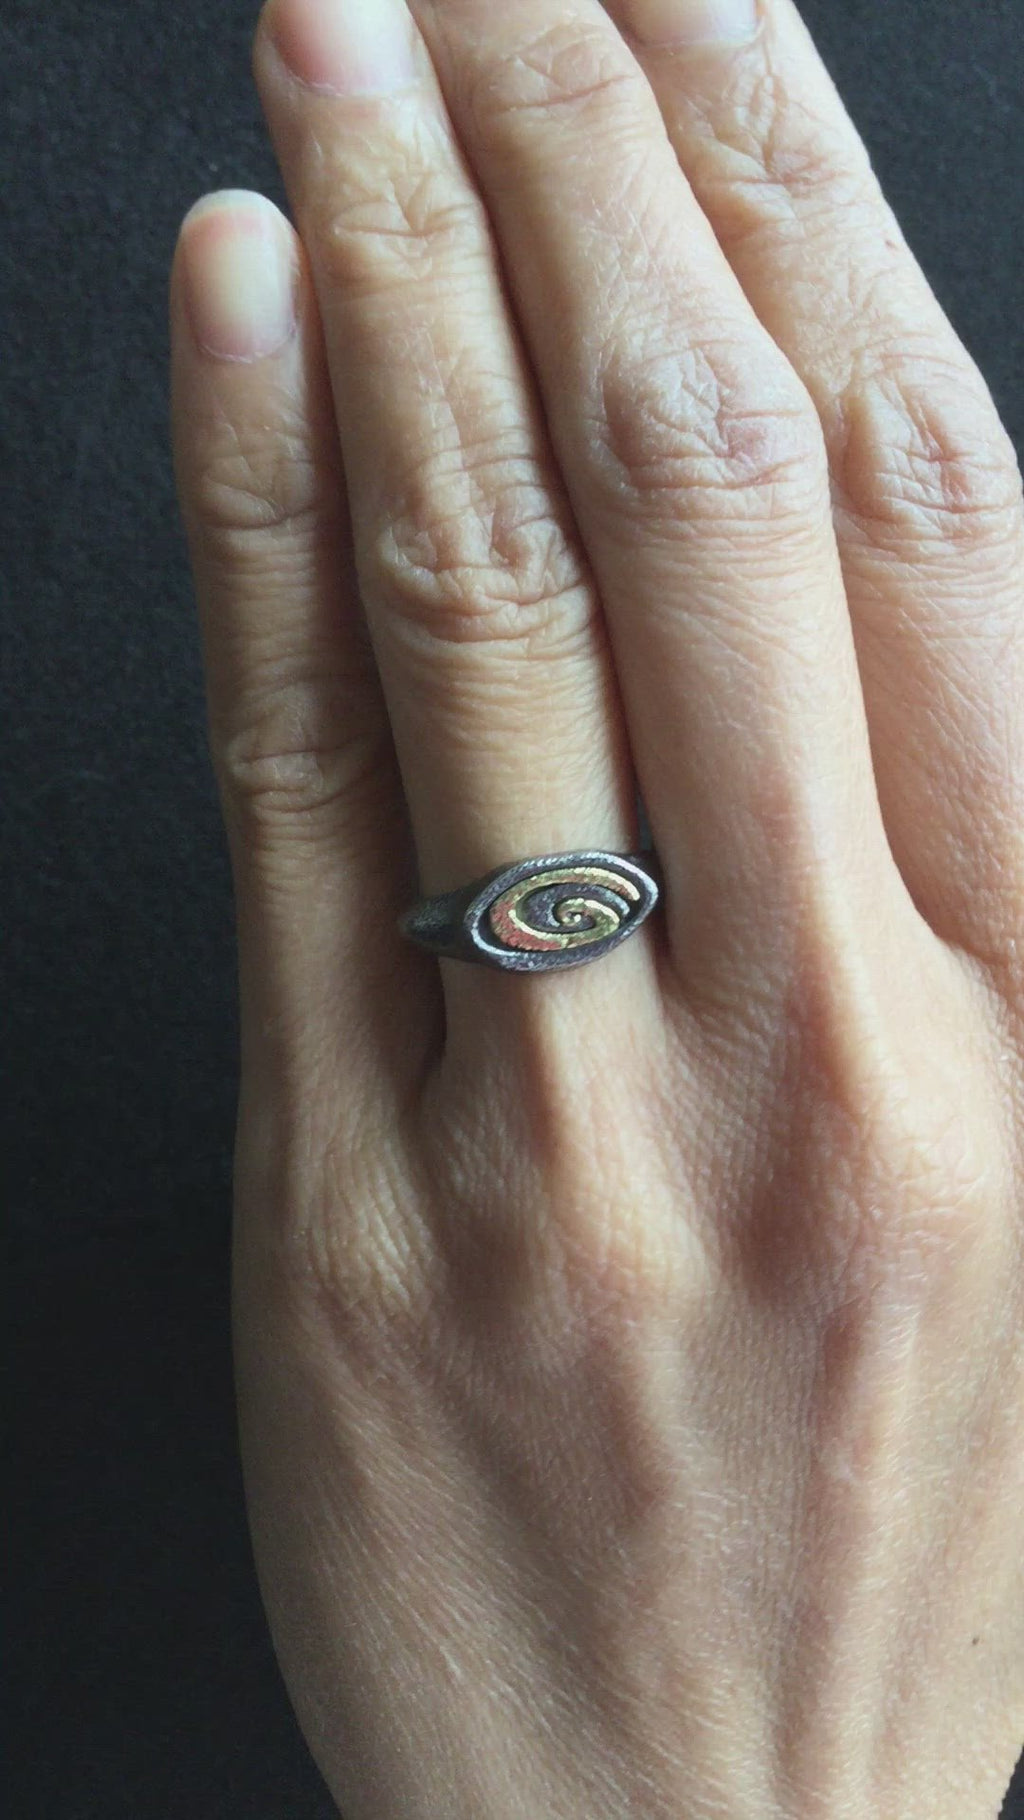 Buy Sterling Silver Spiral Ring, Silver Ring, Statement Ring, Spiral Ring,  Swirl, Gift, Promise Ring, Right Hand Ring, Asymmetric Ring, Unique Online  in India - Etsy